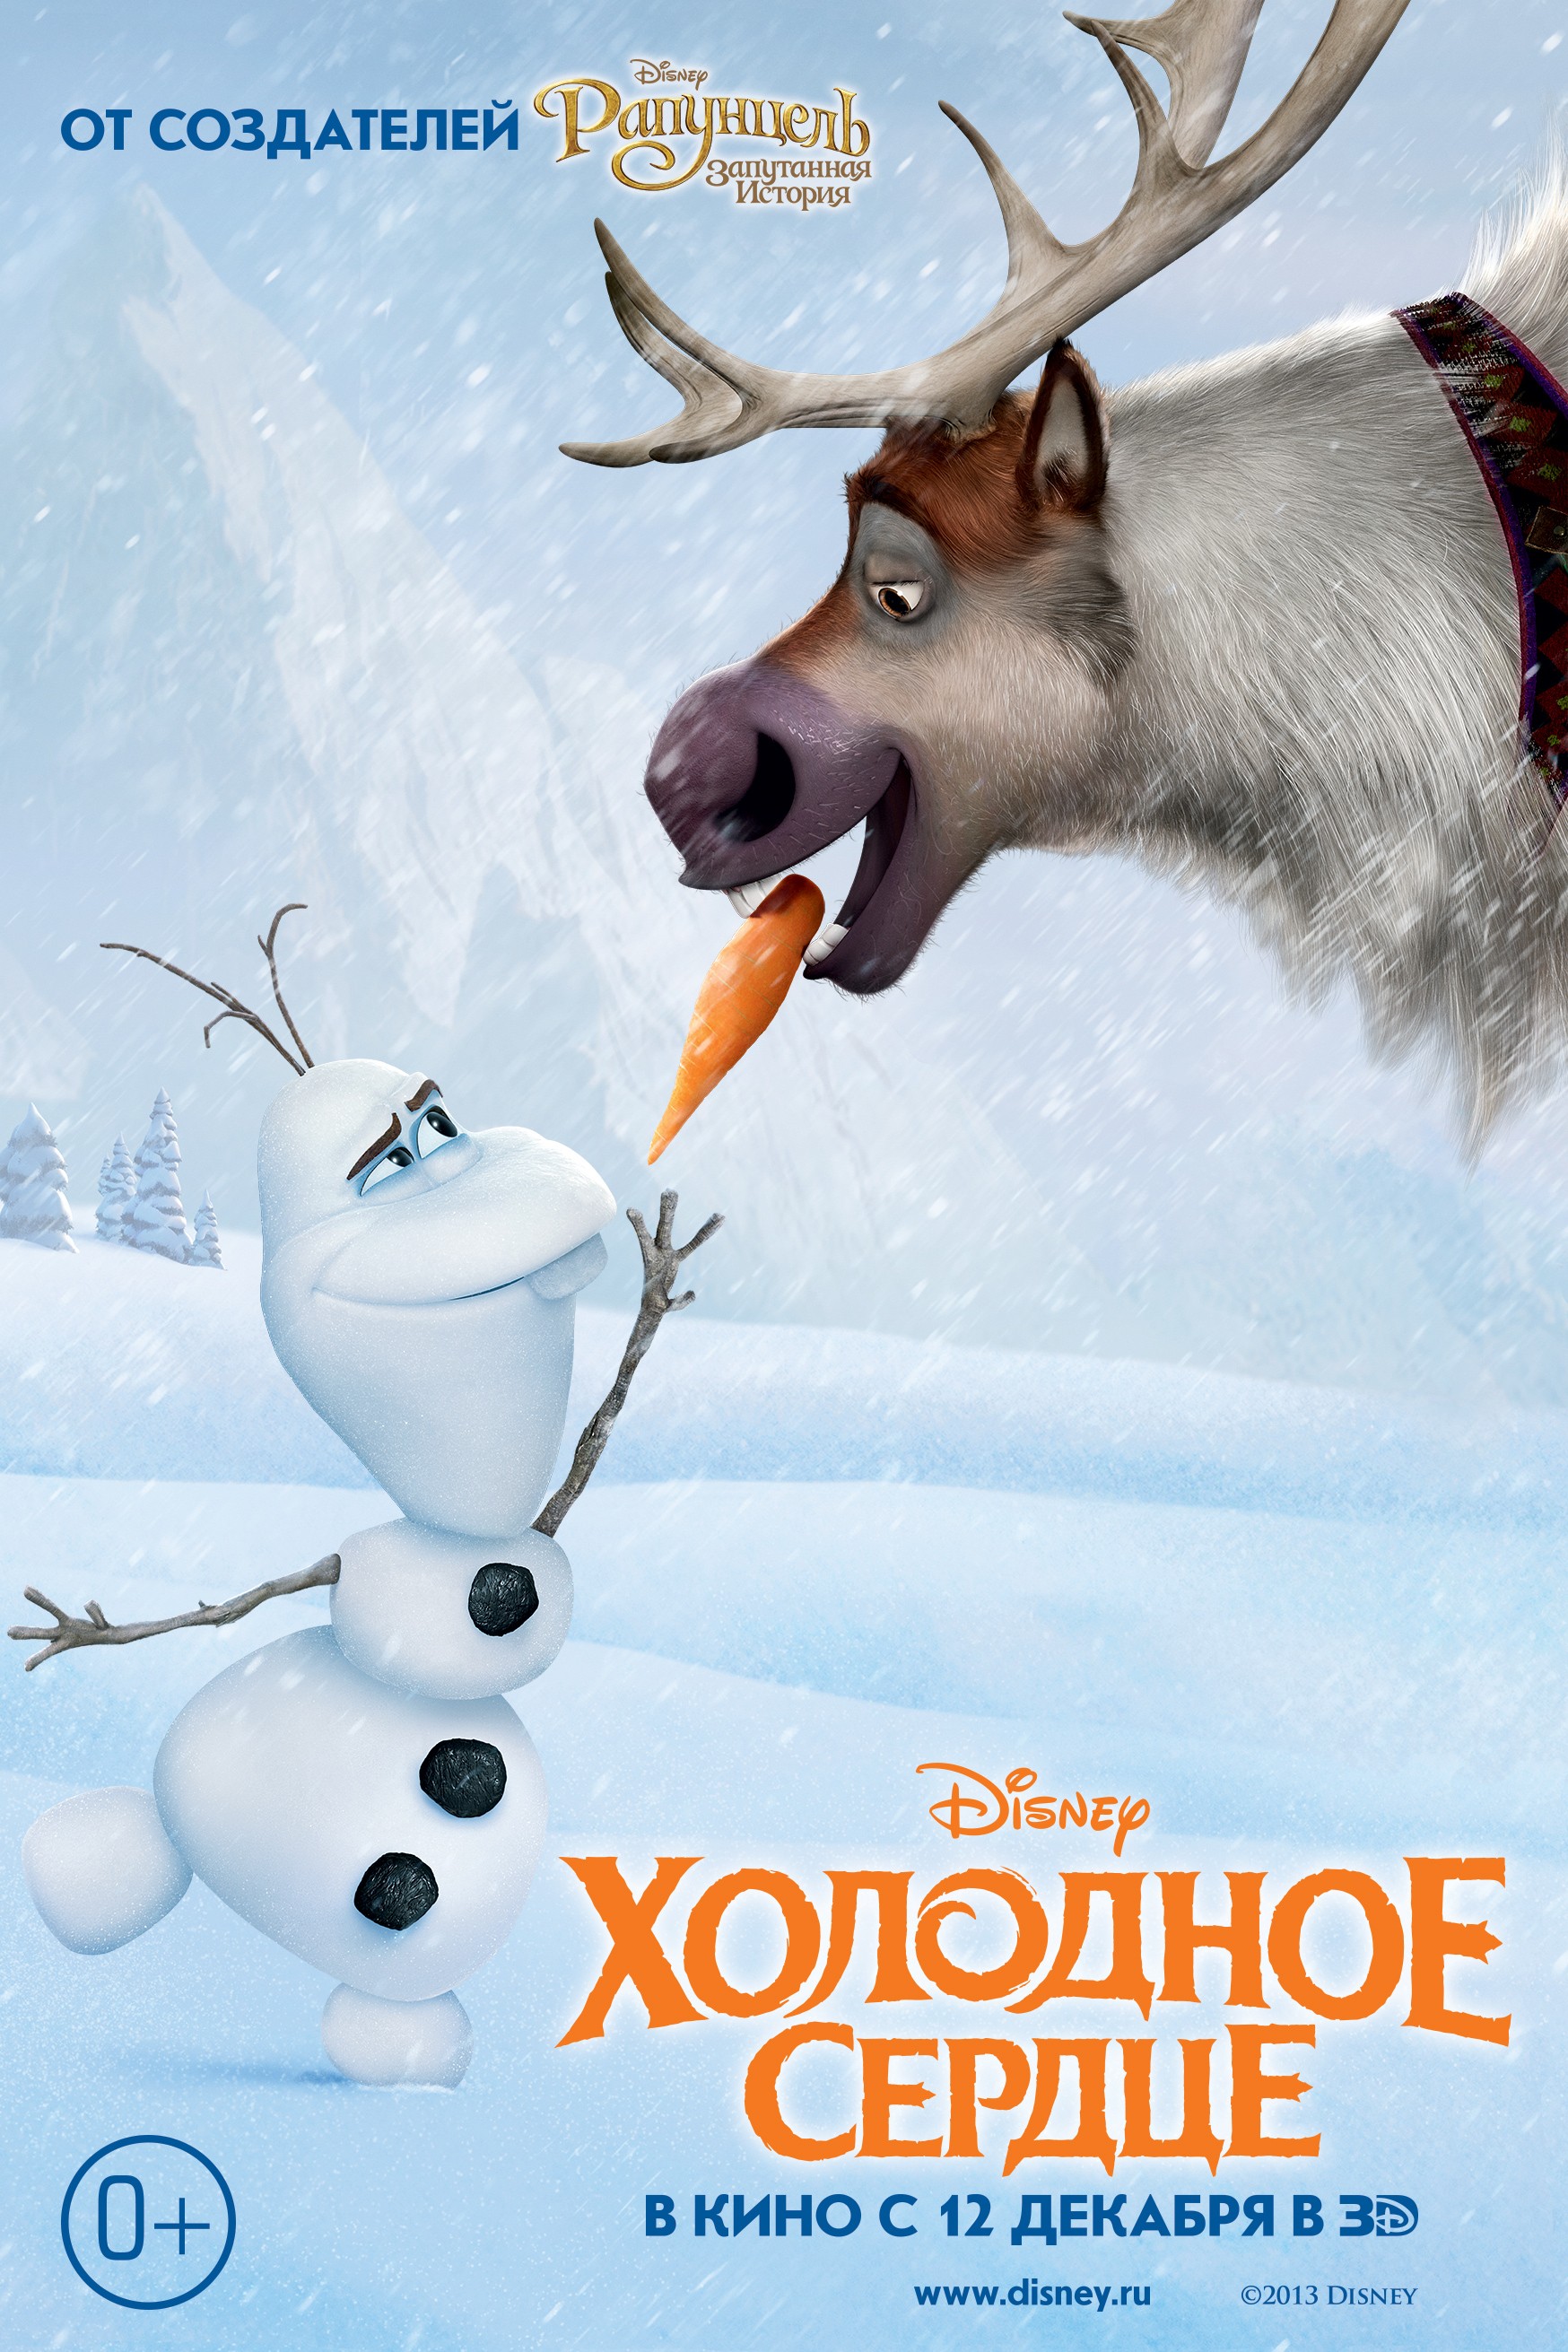 Mega Sized Movie Poster Image for Frozen (#17 of 22)